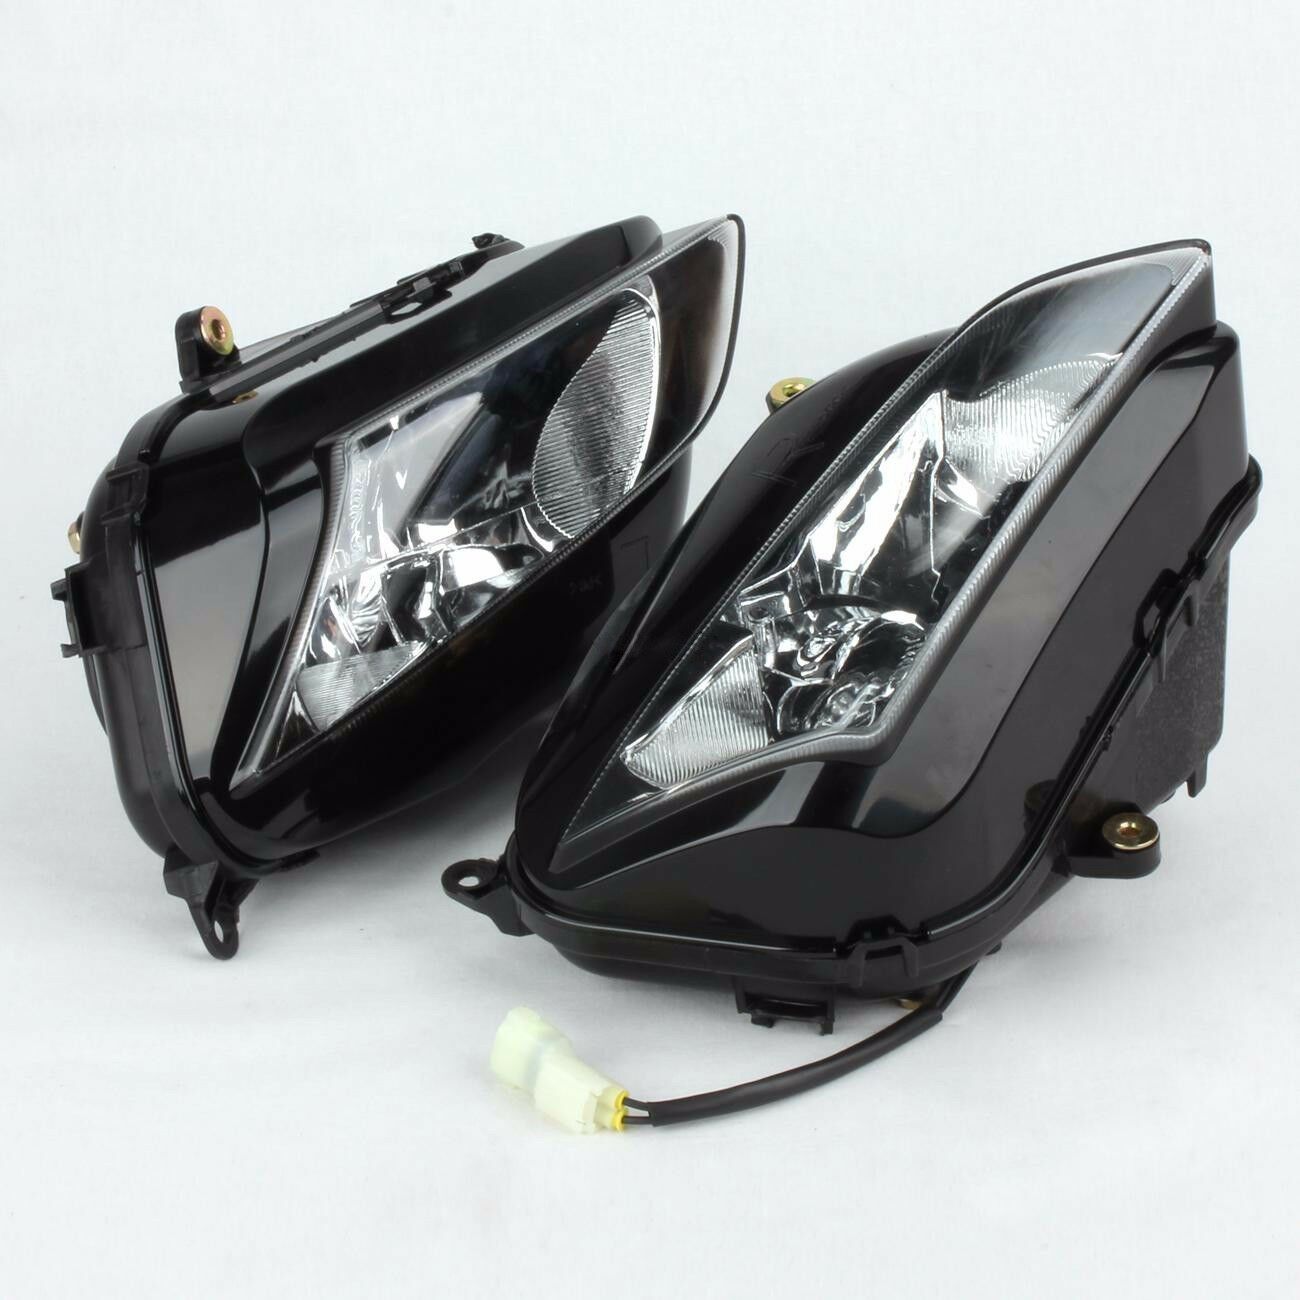 labwork 1Pair Motorcycle Headlight Replacement for Honda CBR600RR 2007-2011